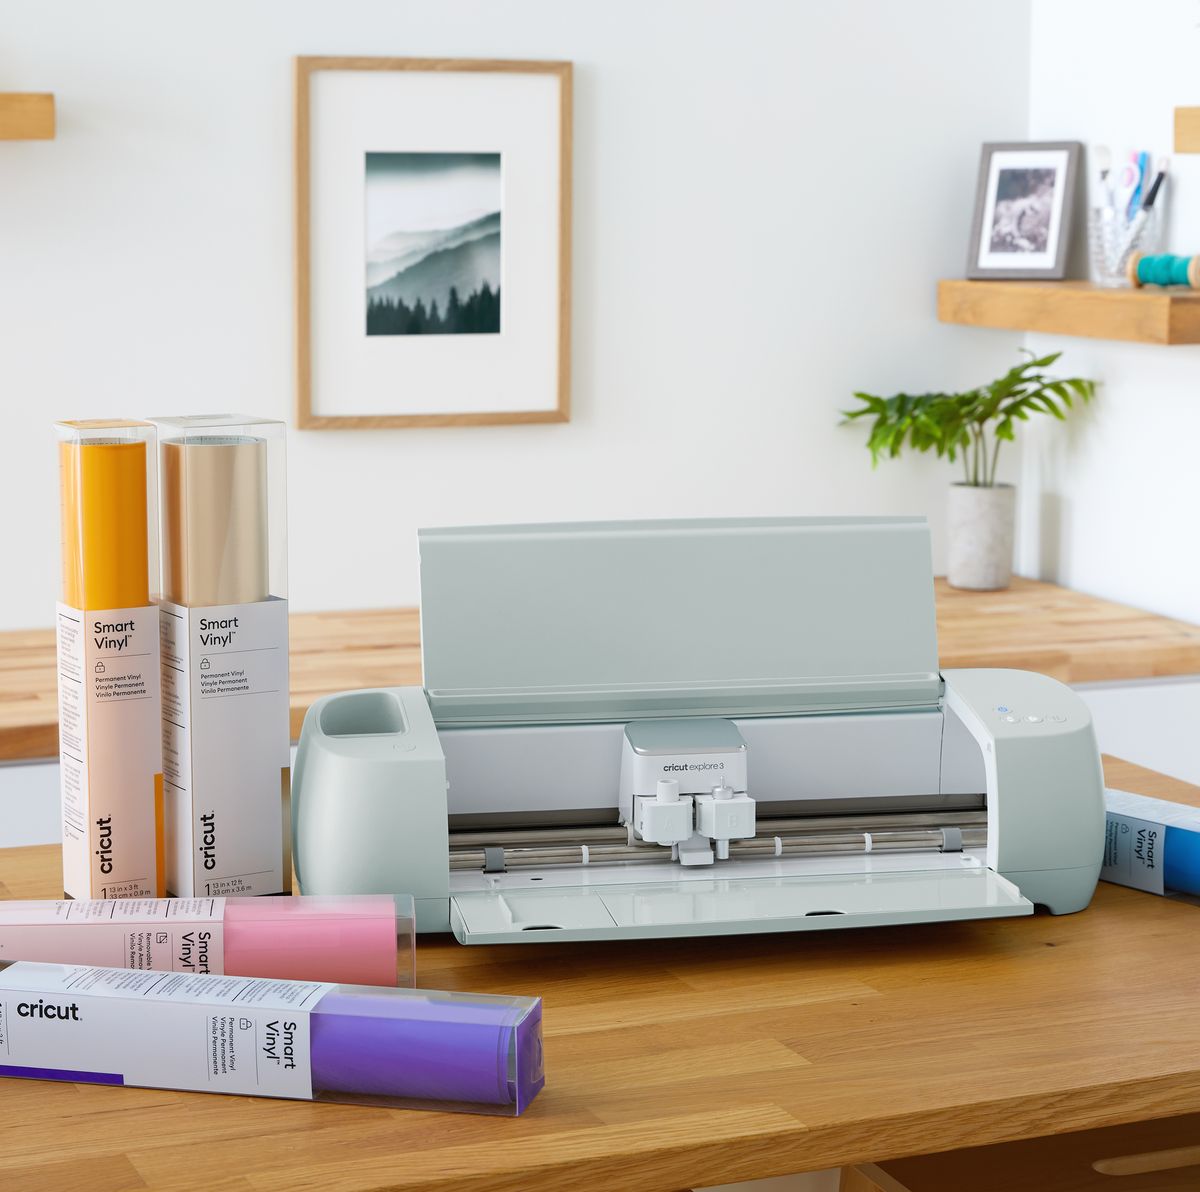 How To Cut Vinyl With A Cricut Machine: A Step By Step Guide